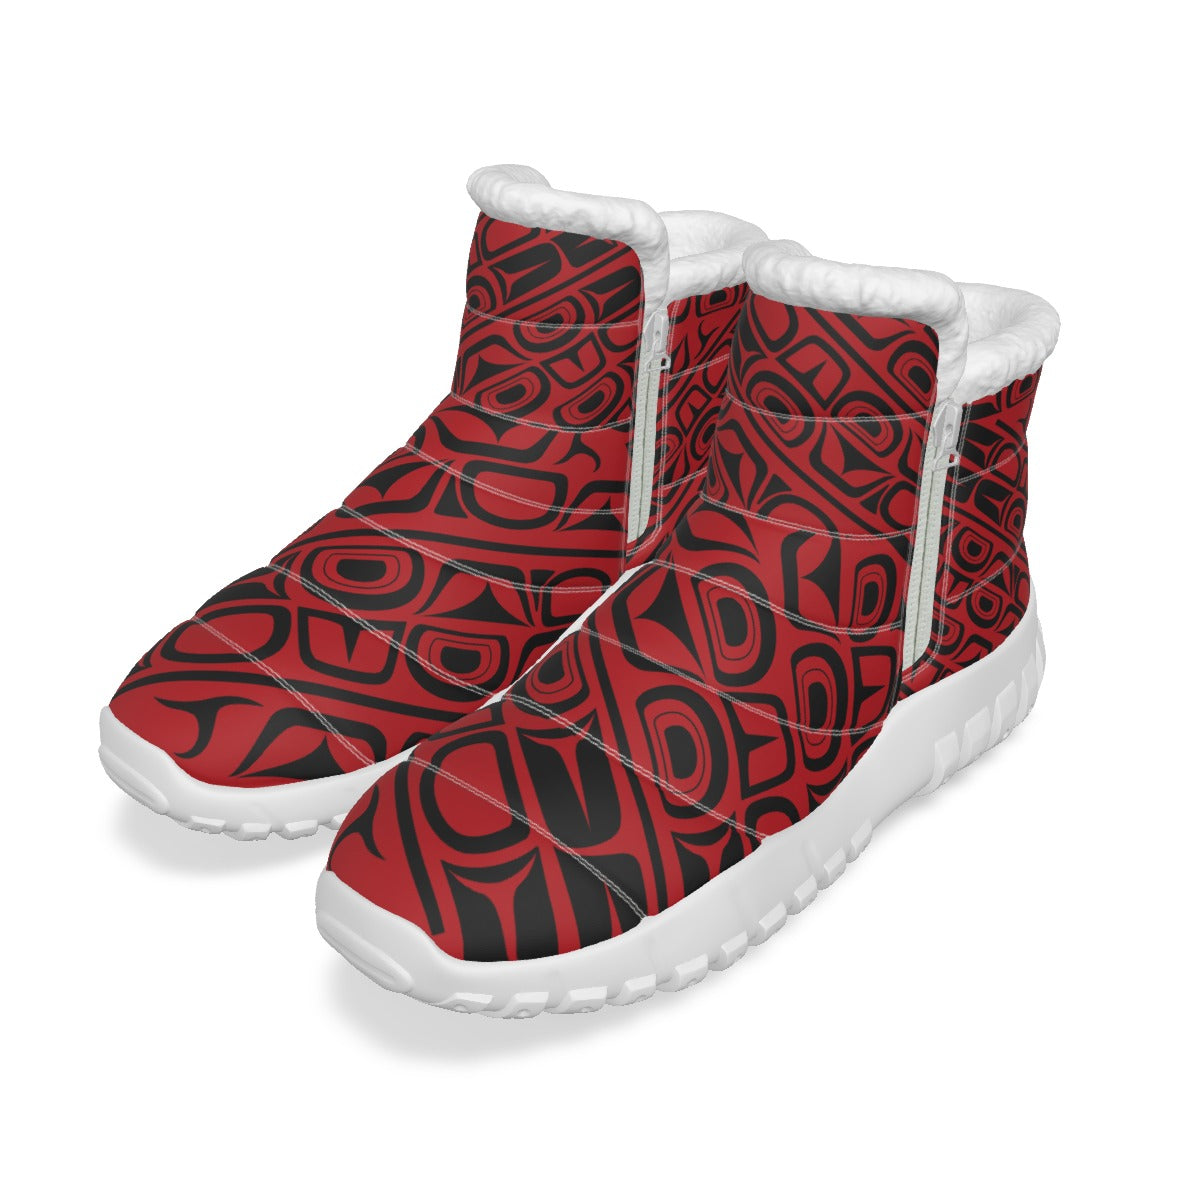 Form Red on Black Women's Zip-up Snow Boots